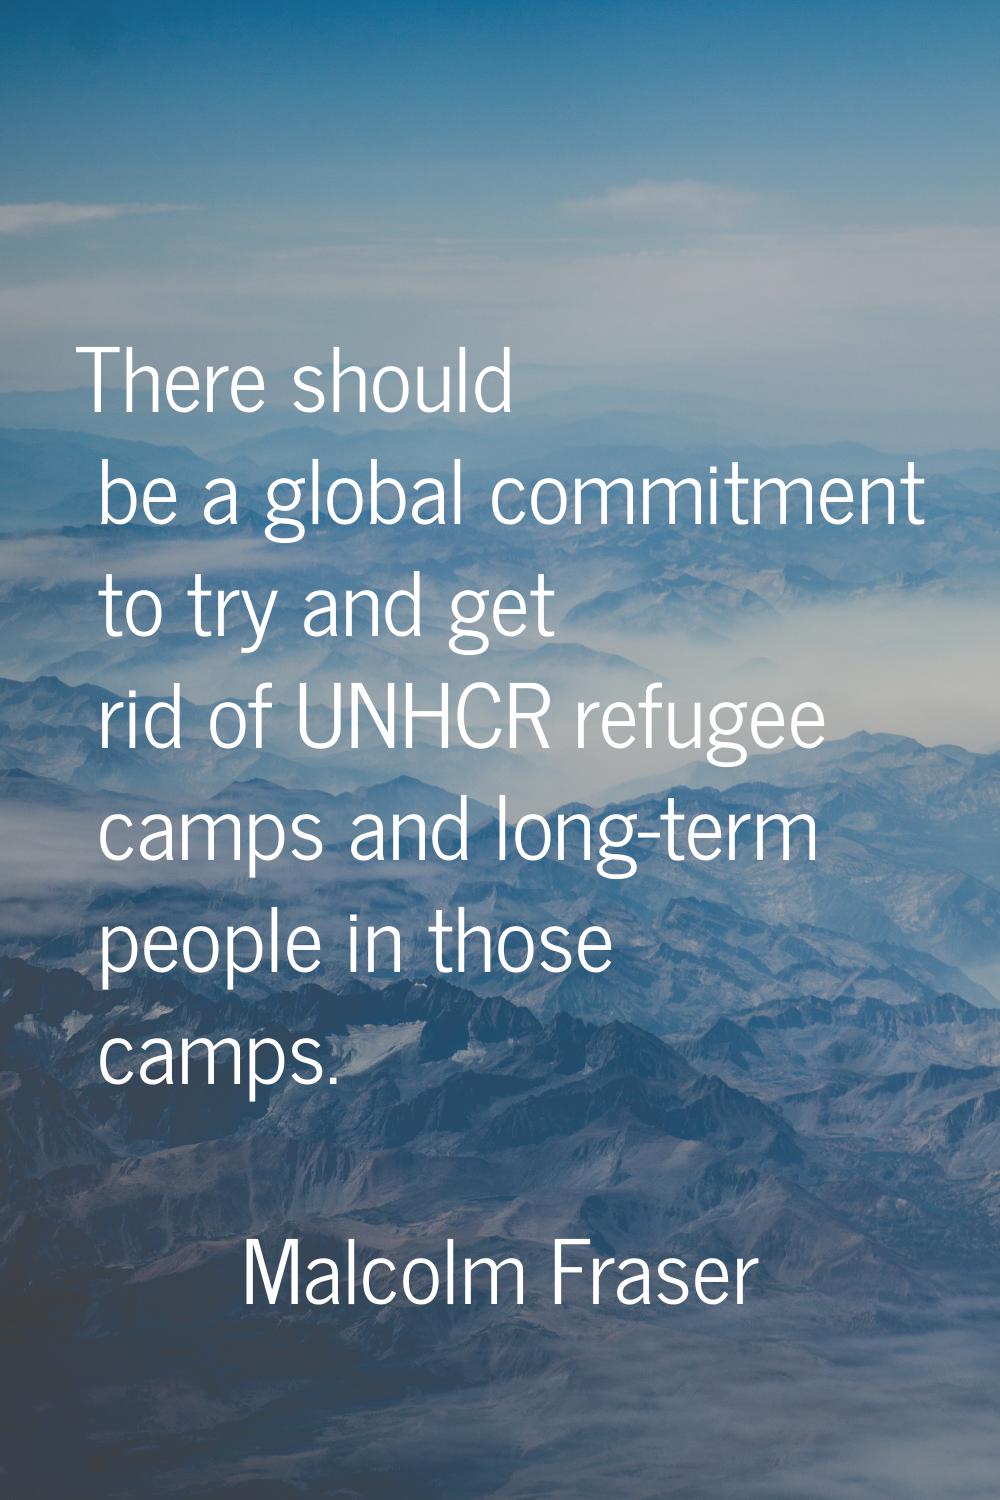 There should be a global commitment to try and get rid of UNHCR refugee camps and long-term people 